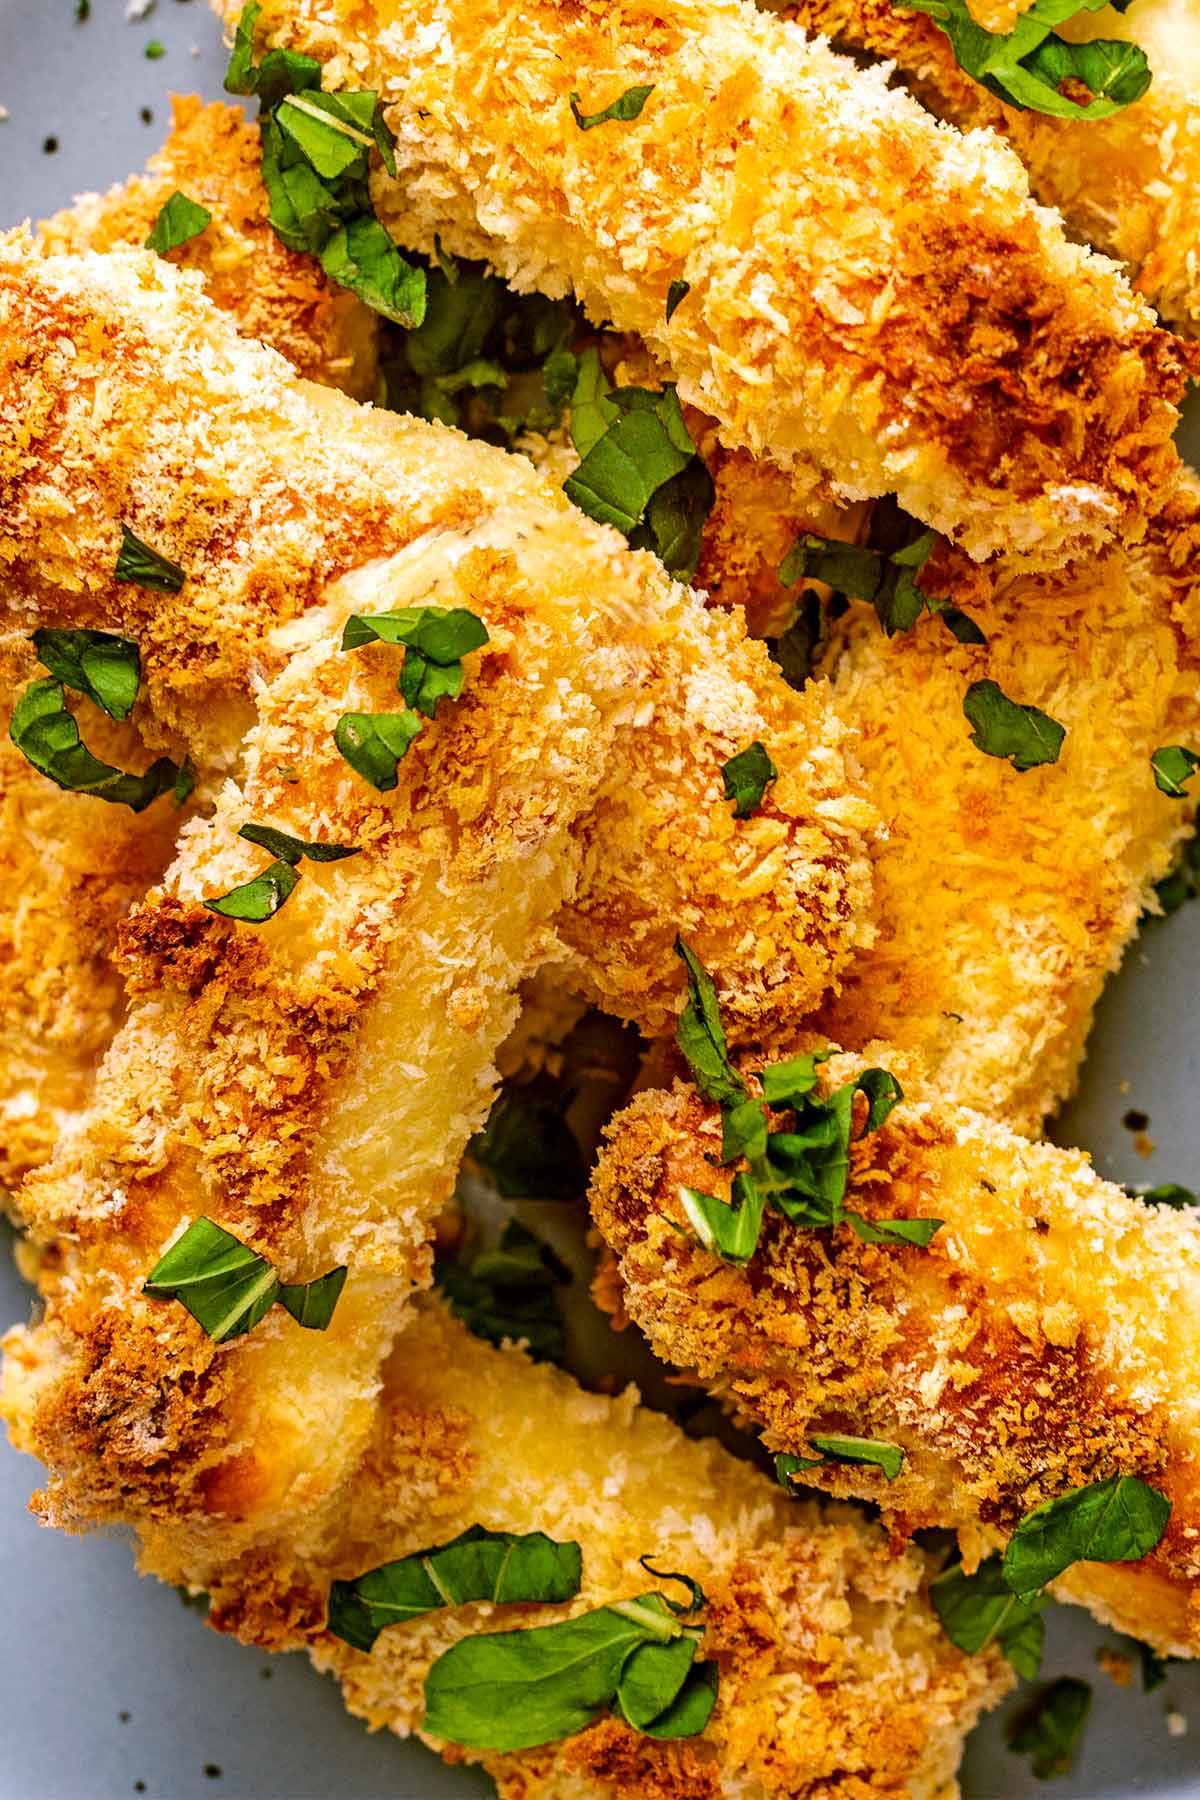 Baked halloumi fries with chopped herbs sprinkled on them.